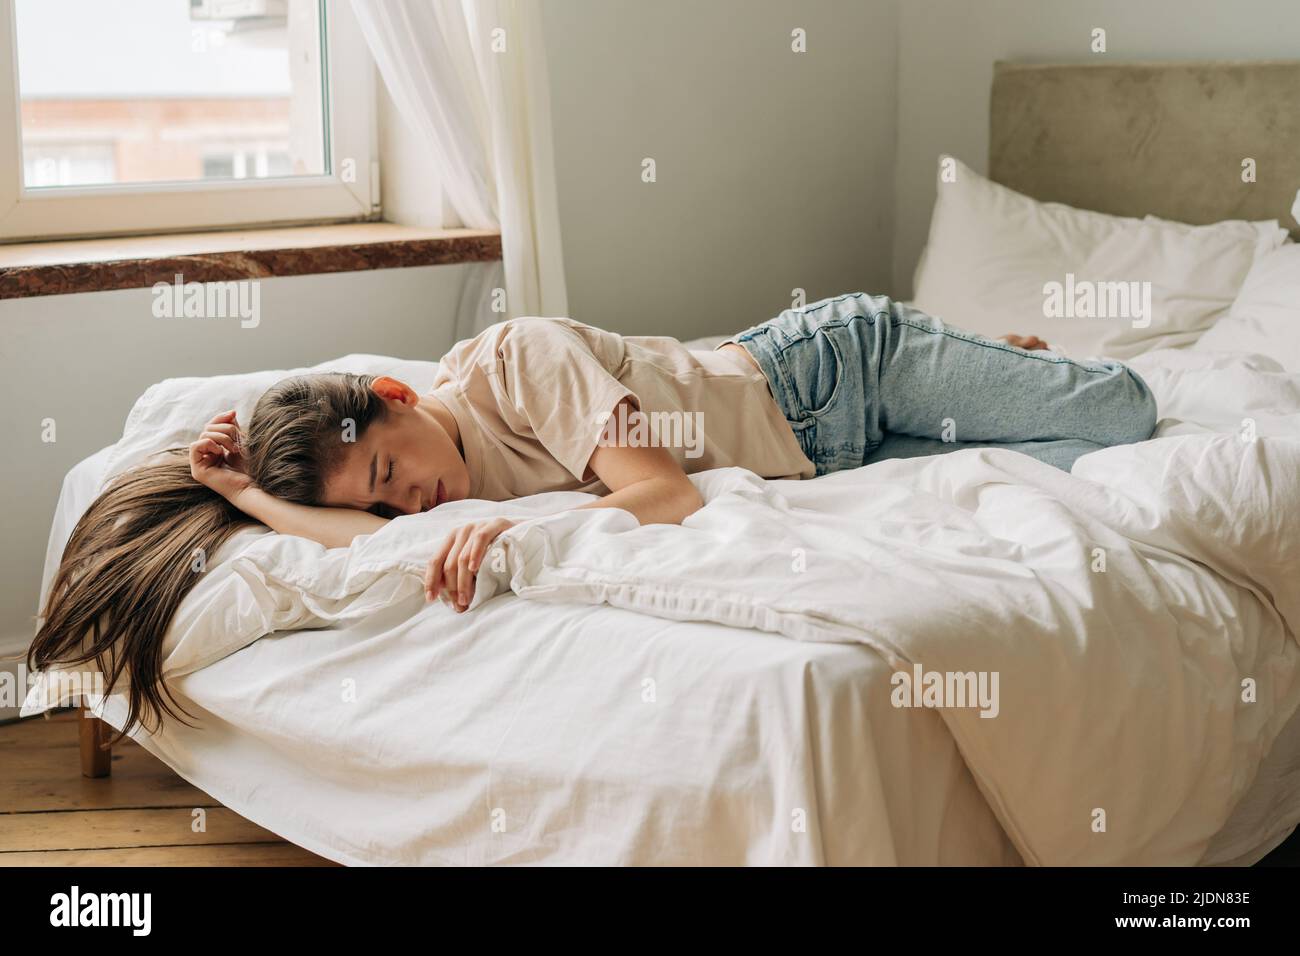 Depressed frustrated young woman is sad lying on the bed during the day. Stock Photo